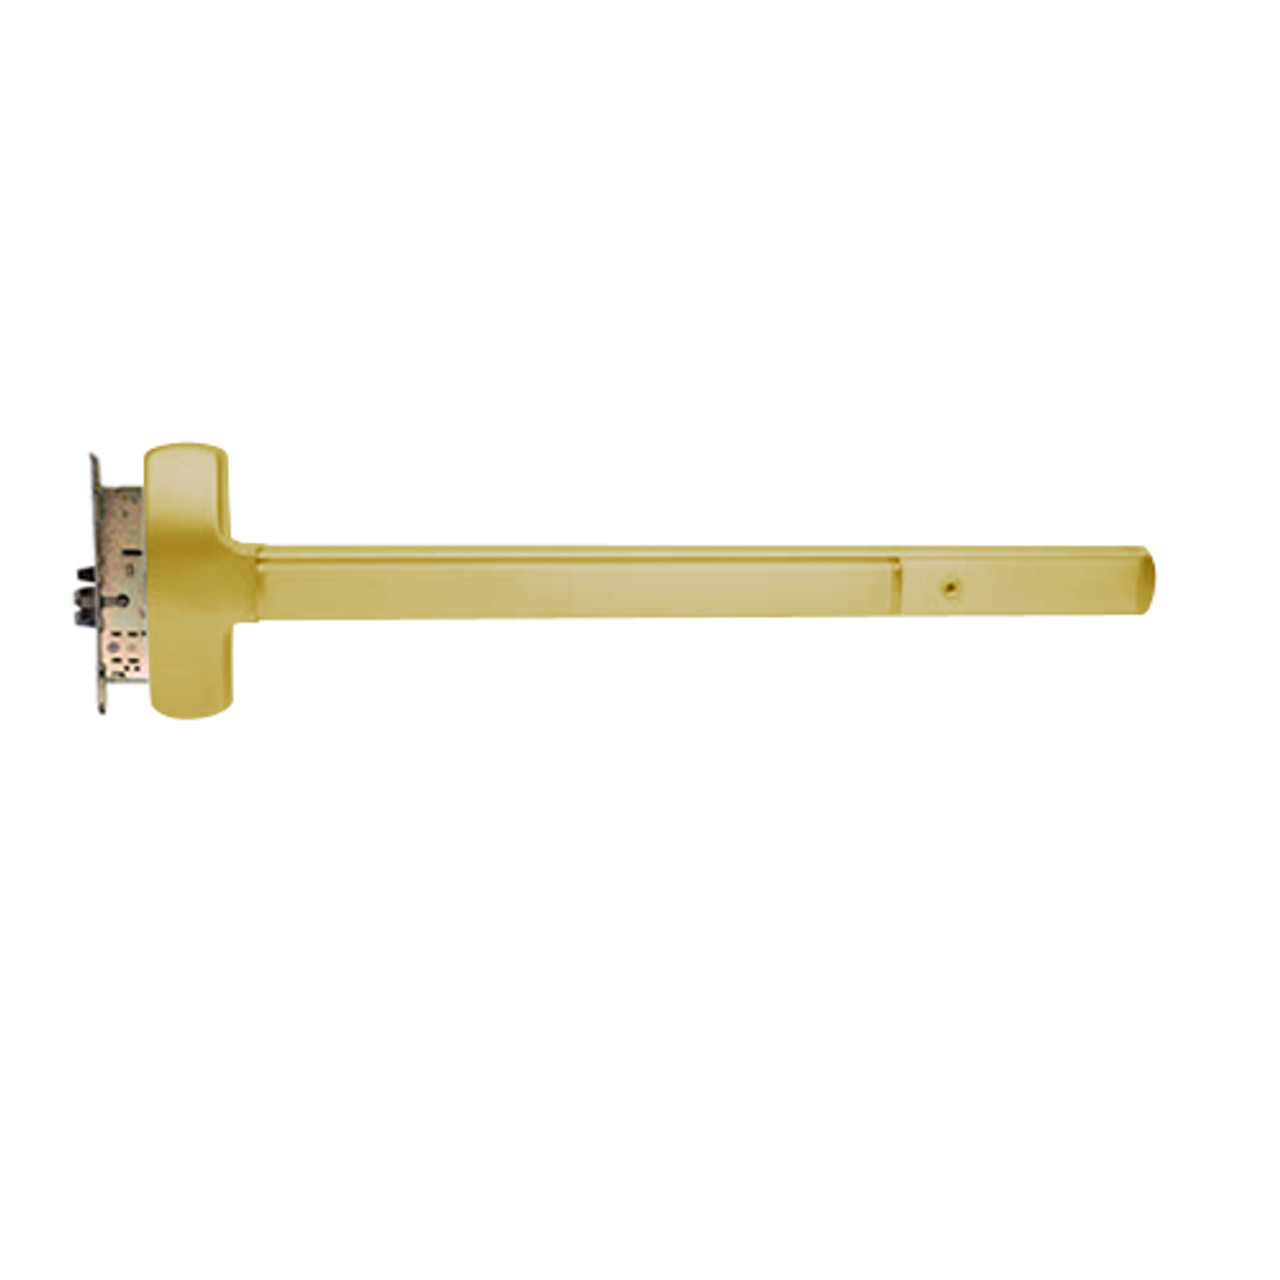 25-M-EO-US3-4-RHR Falcon Exit Device in Polished Brass